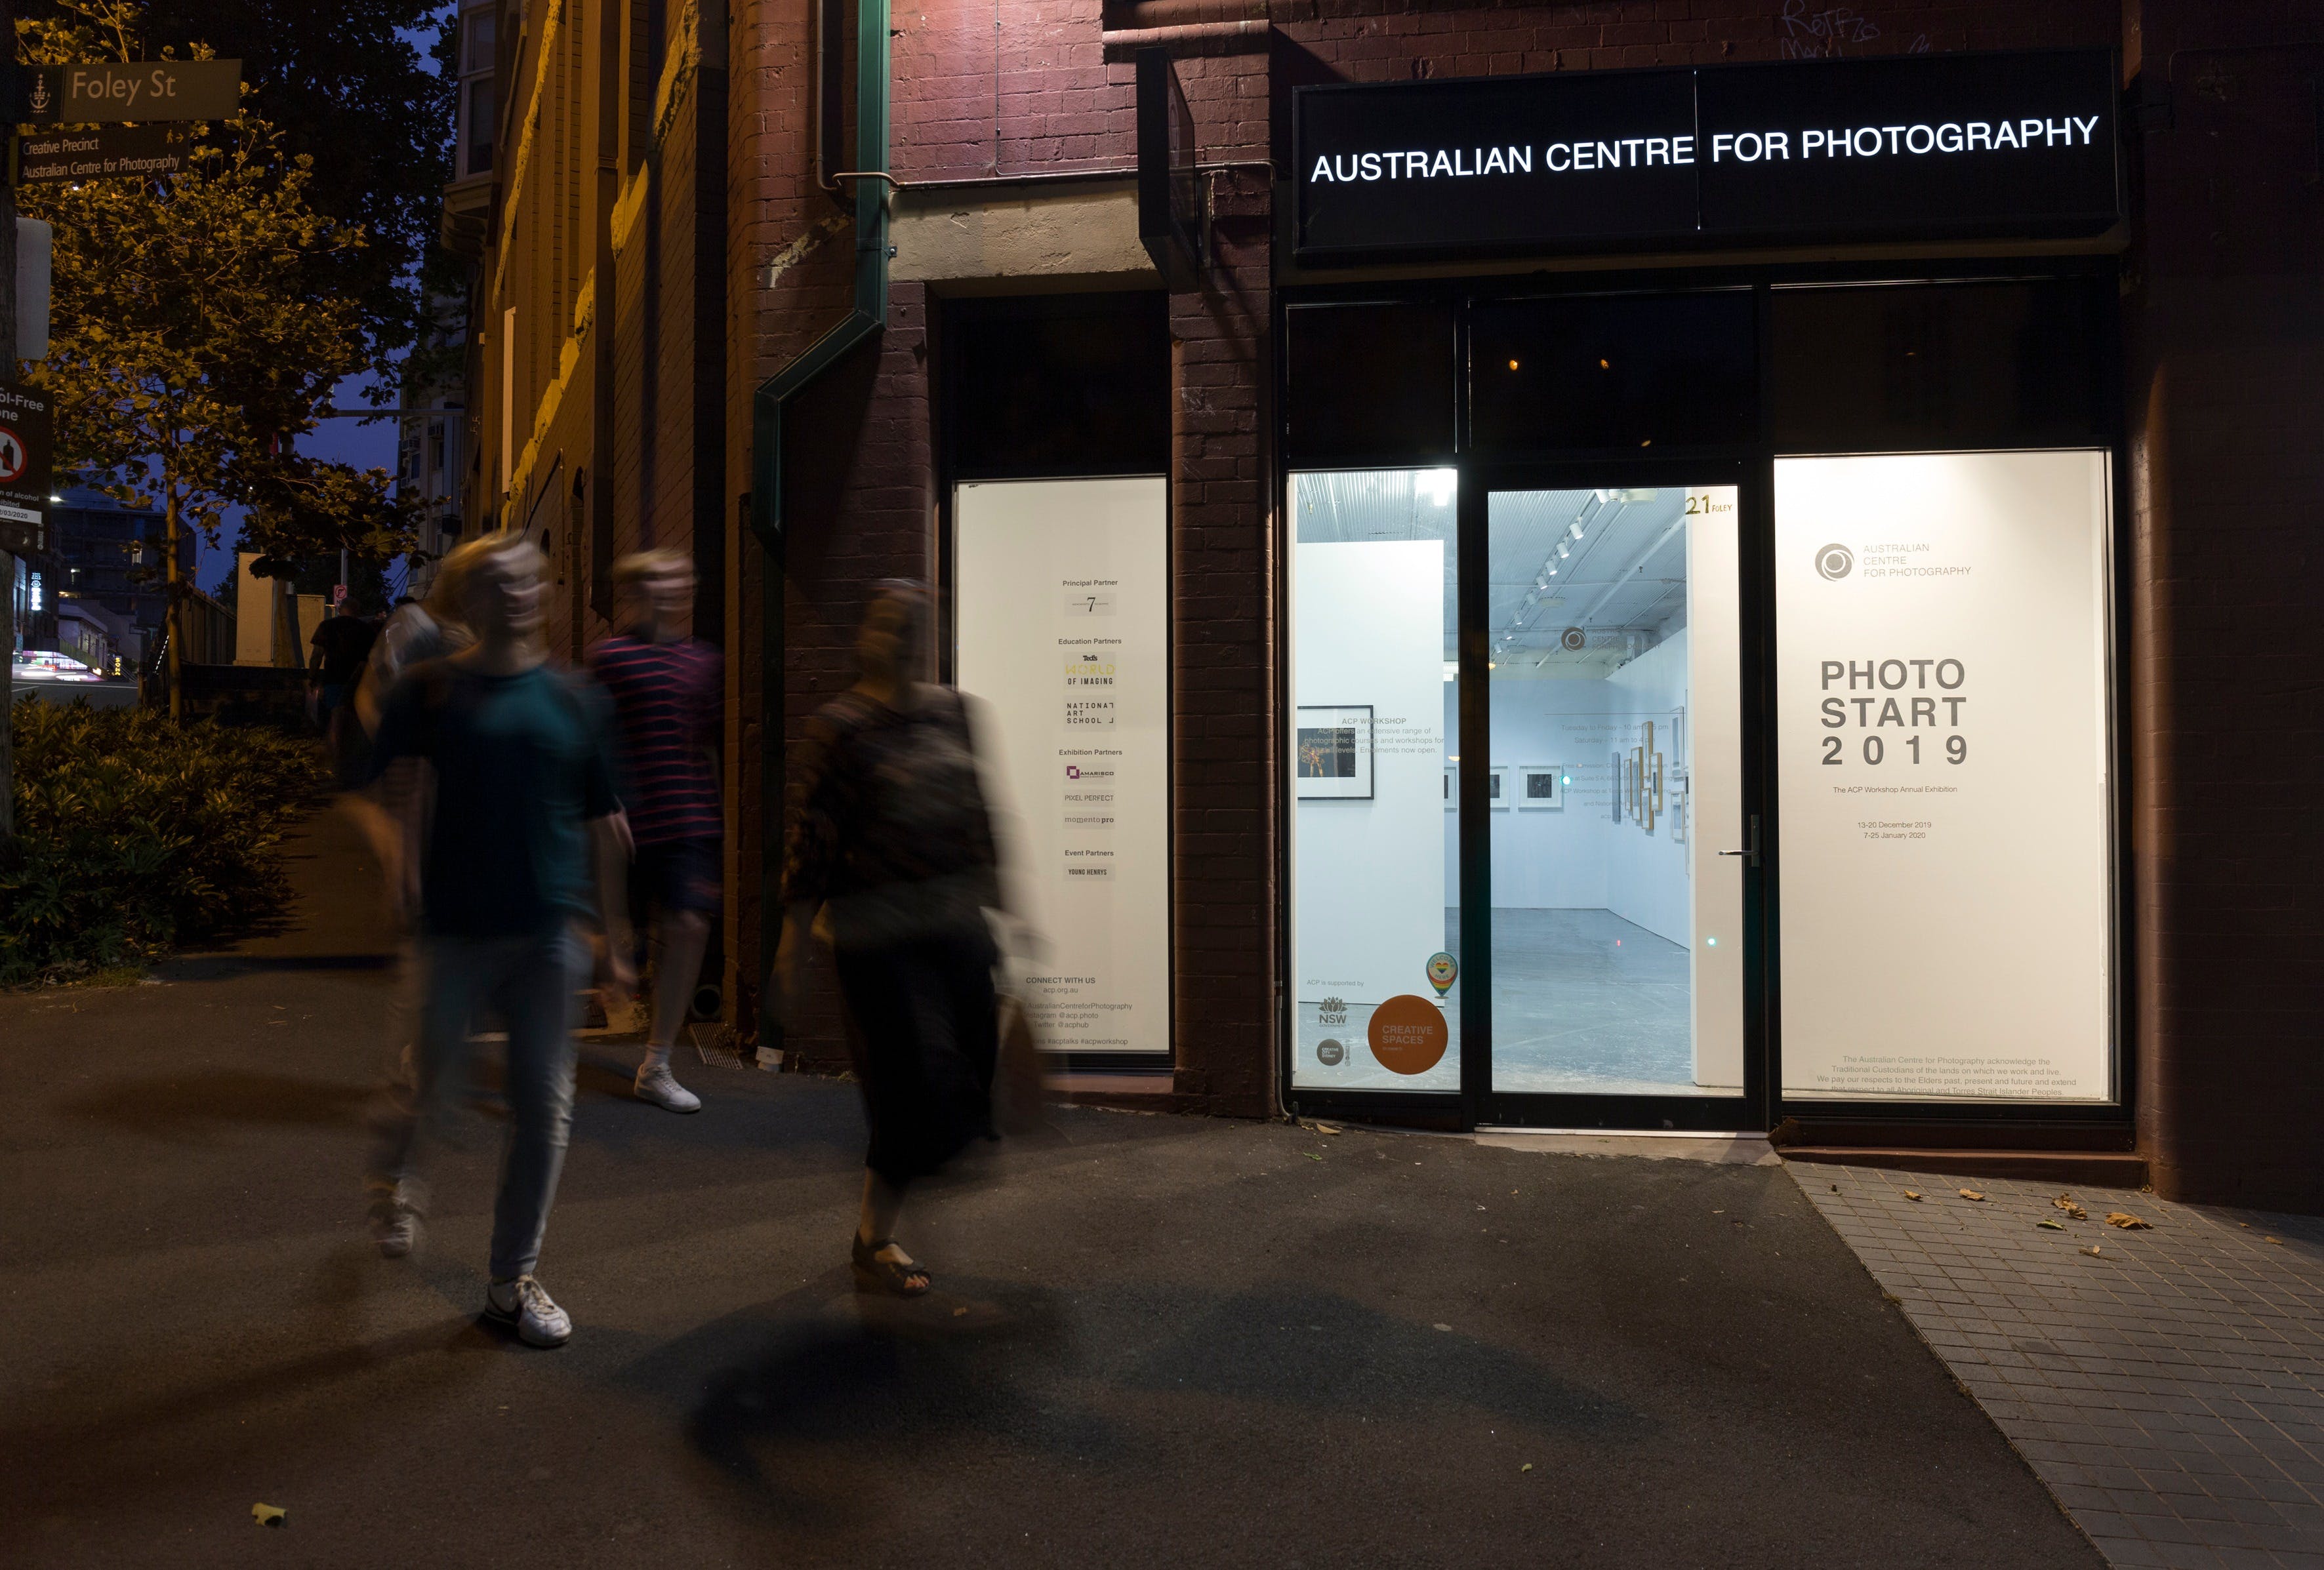 Australian Centre for Photography - Attractions